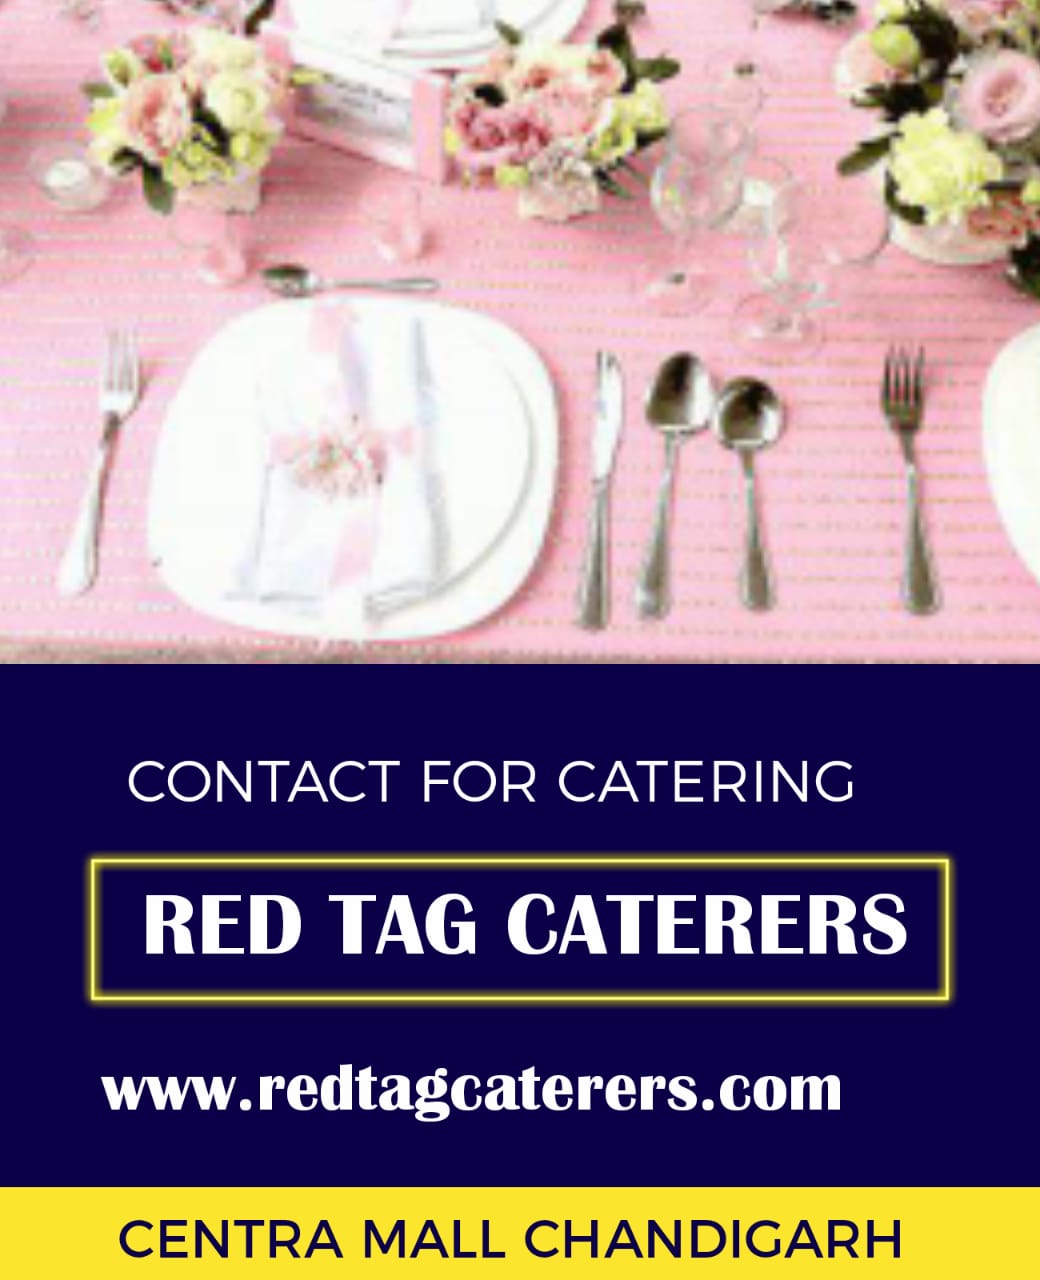 RED TAG Caterers & Marriage Contractors in Chandigarh city | Red Tag Caterers | Marriage Contractors catering services in Chandigarh, delicious food catering services in Chandigarh, high quality catering services in Chandigarh, best experience catering services in Chandigarh, wed - GL46300